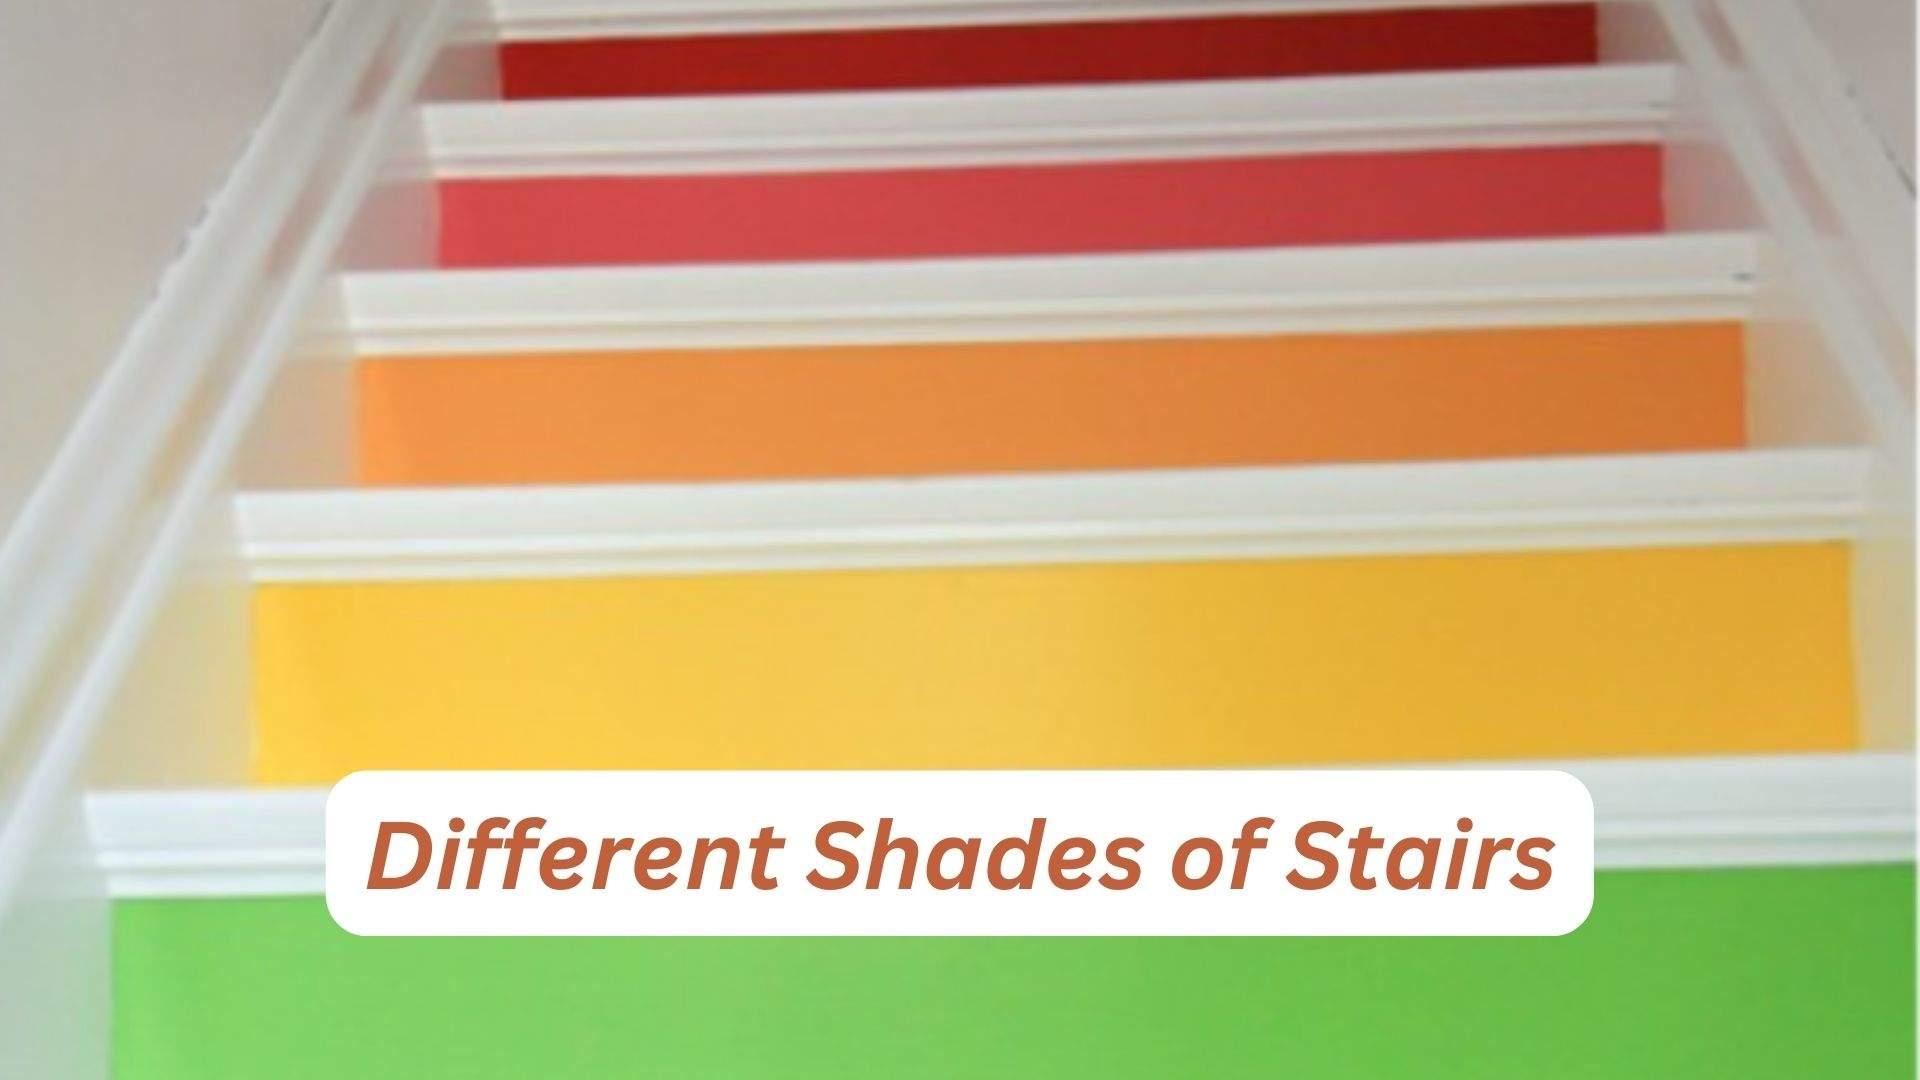 Different Shades of Stairs